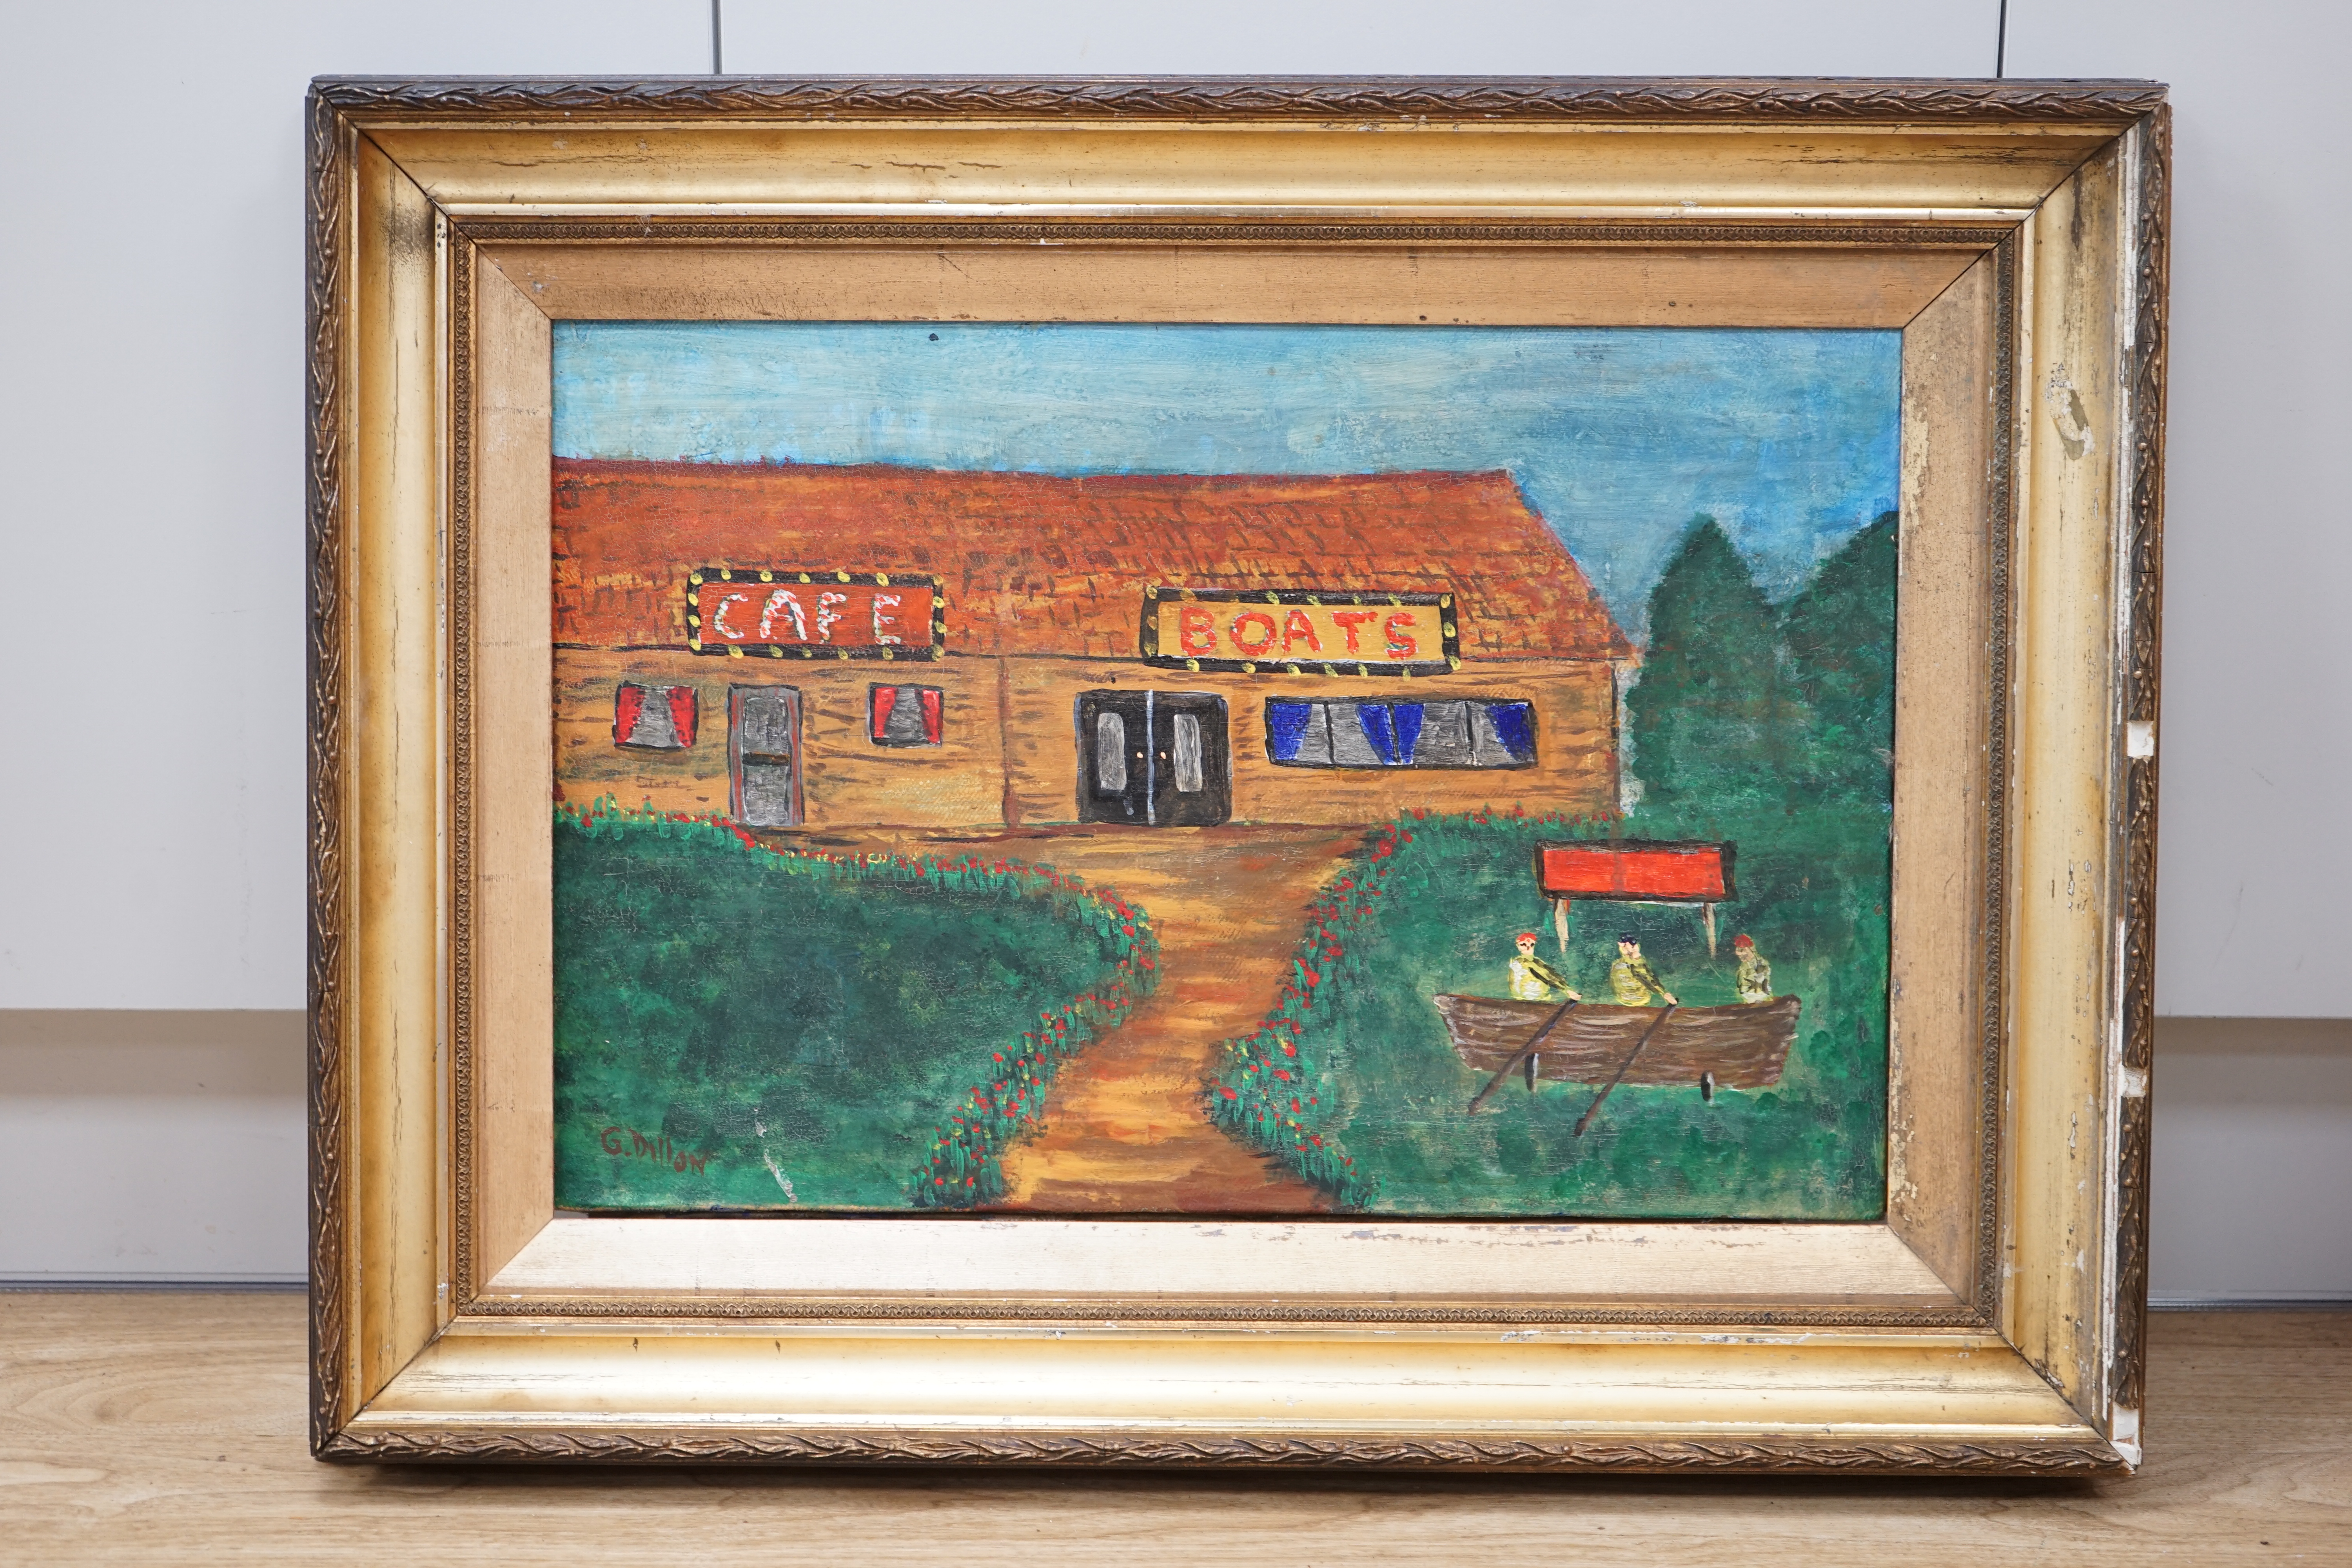 After Gerard Dillon (1916-1971), decorative oil on canvas, Cafe and Boat hire scene, 35 x 53cm. Condition - fair, would benefit from a clean, canvas sagging slightly